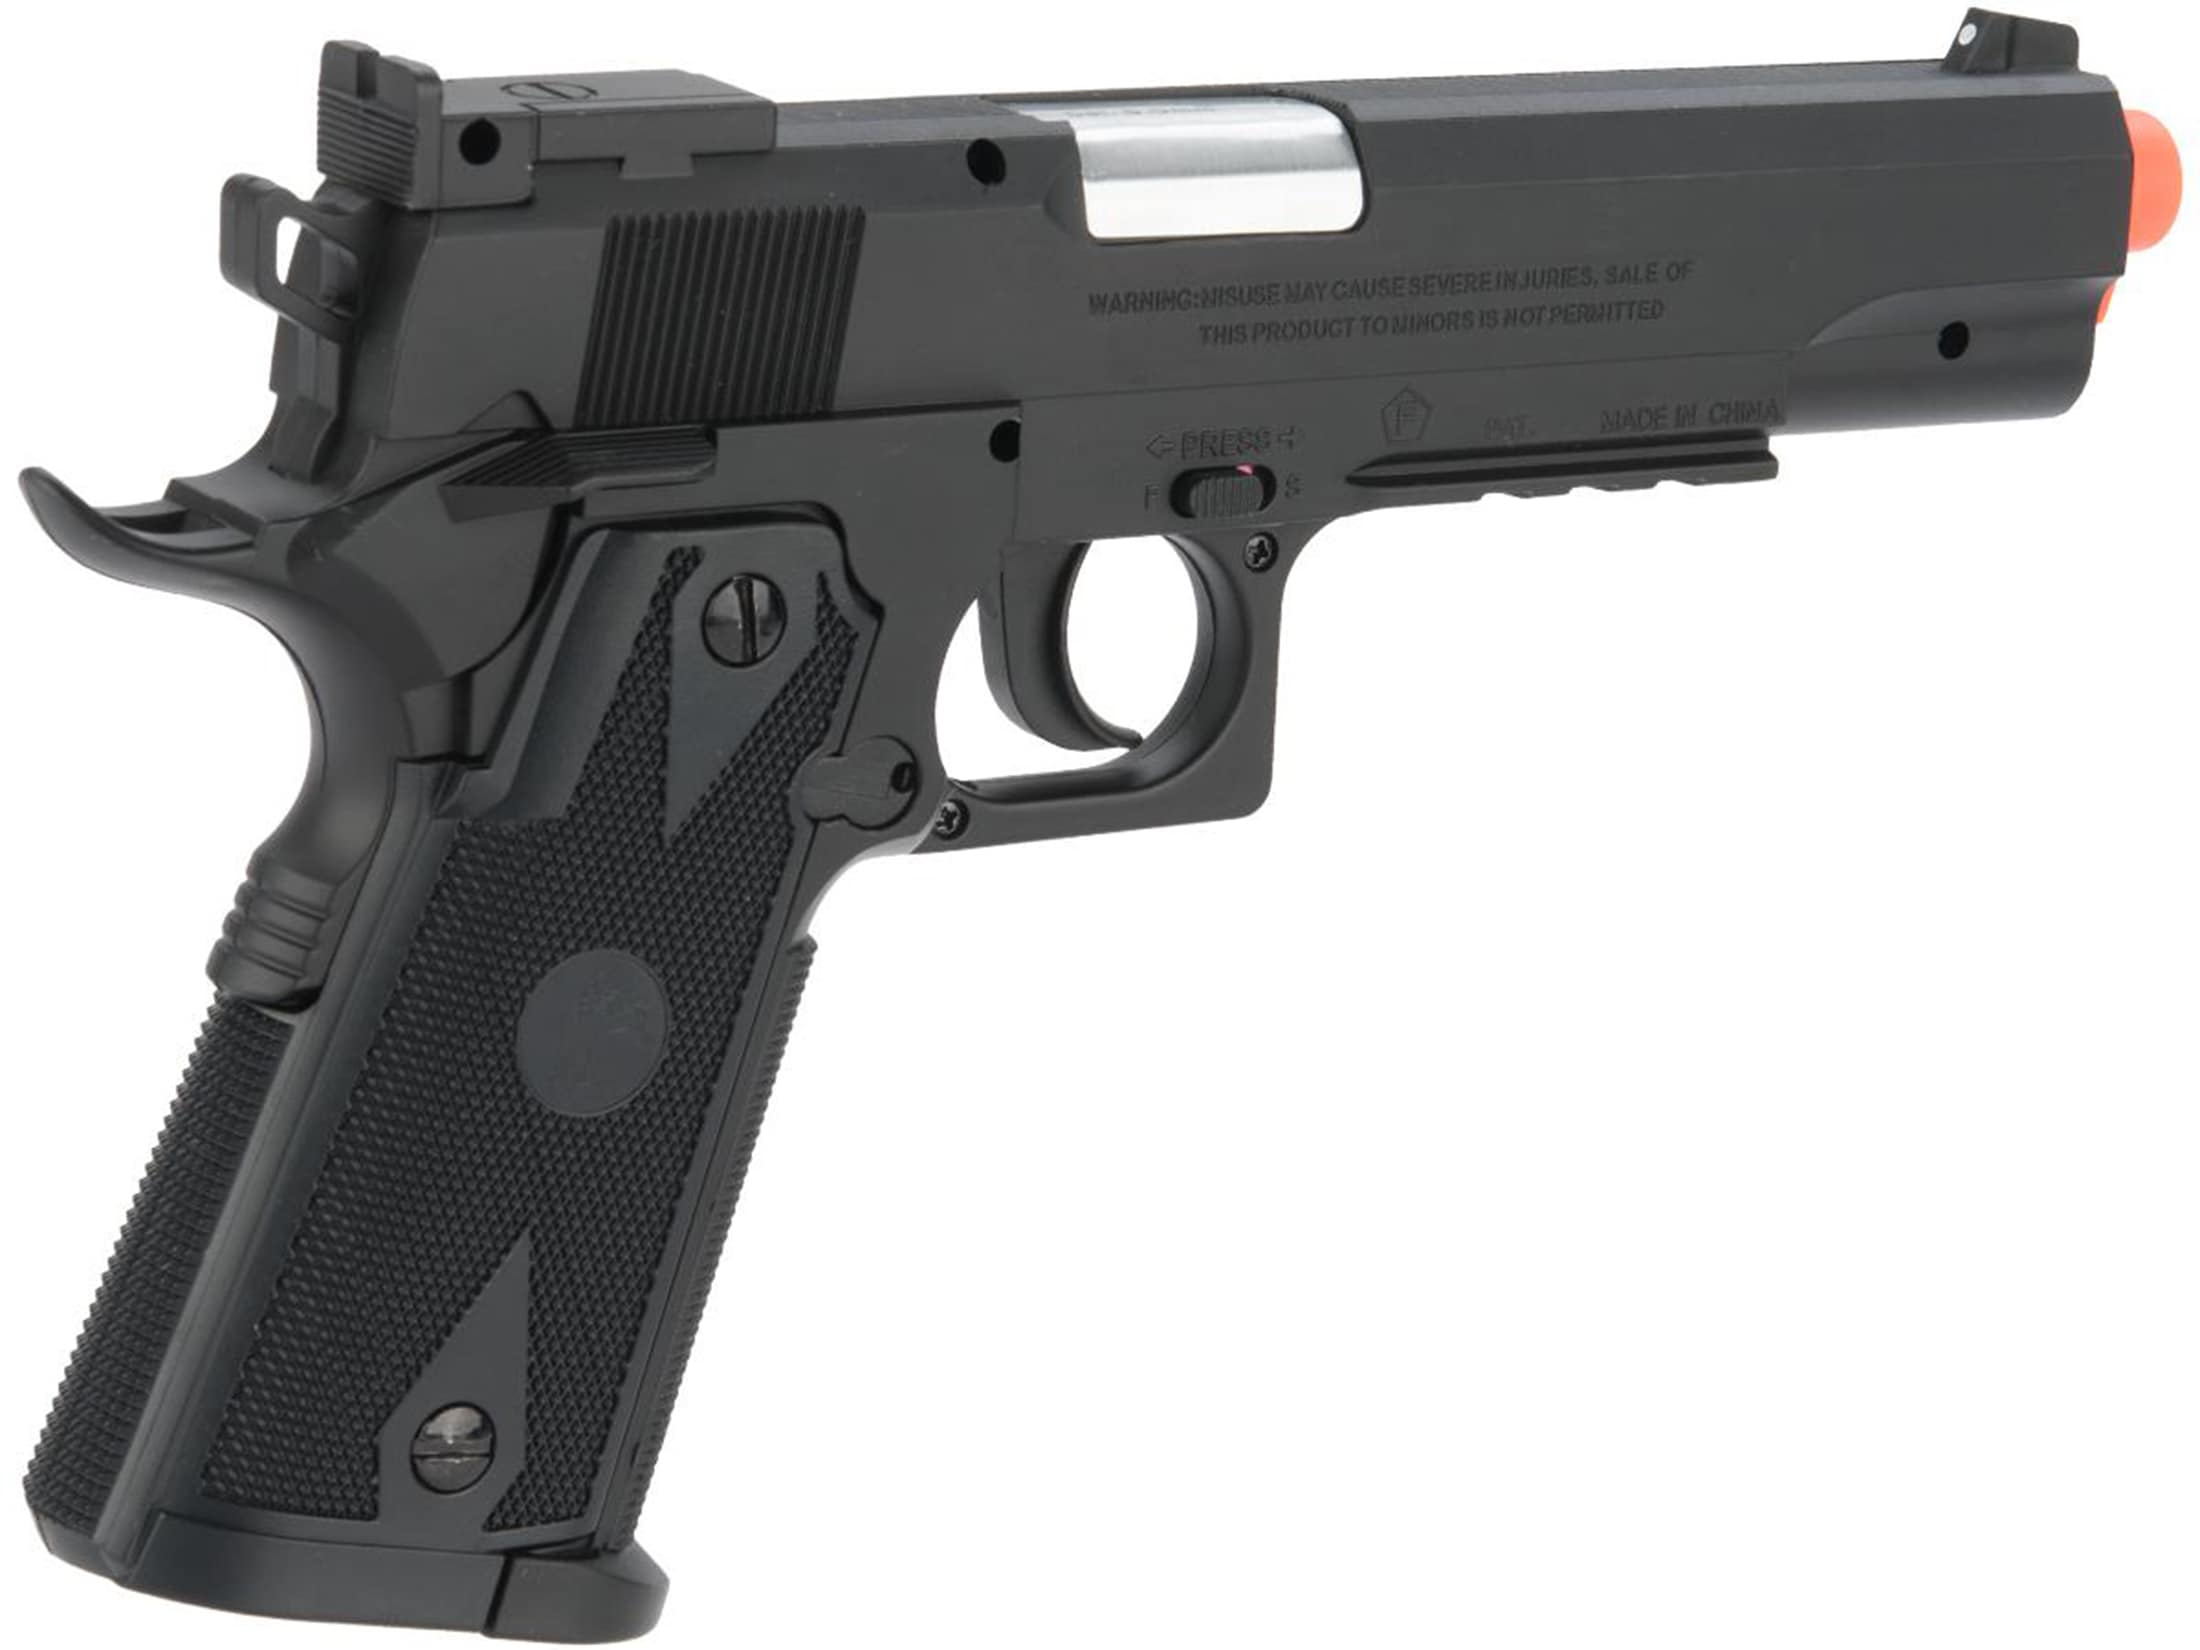 Colt 1911 Special Combat Airsoft Pistol 6mm BB CO2 Powered Semi-Auto